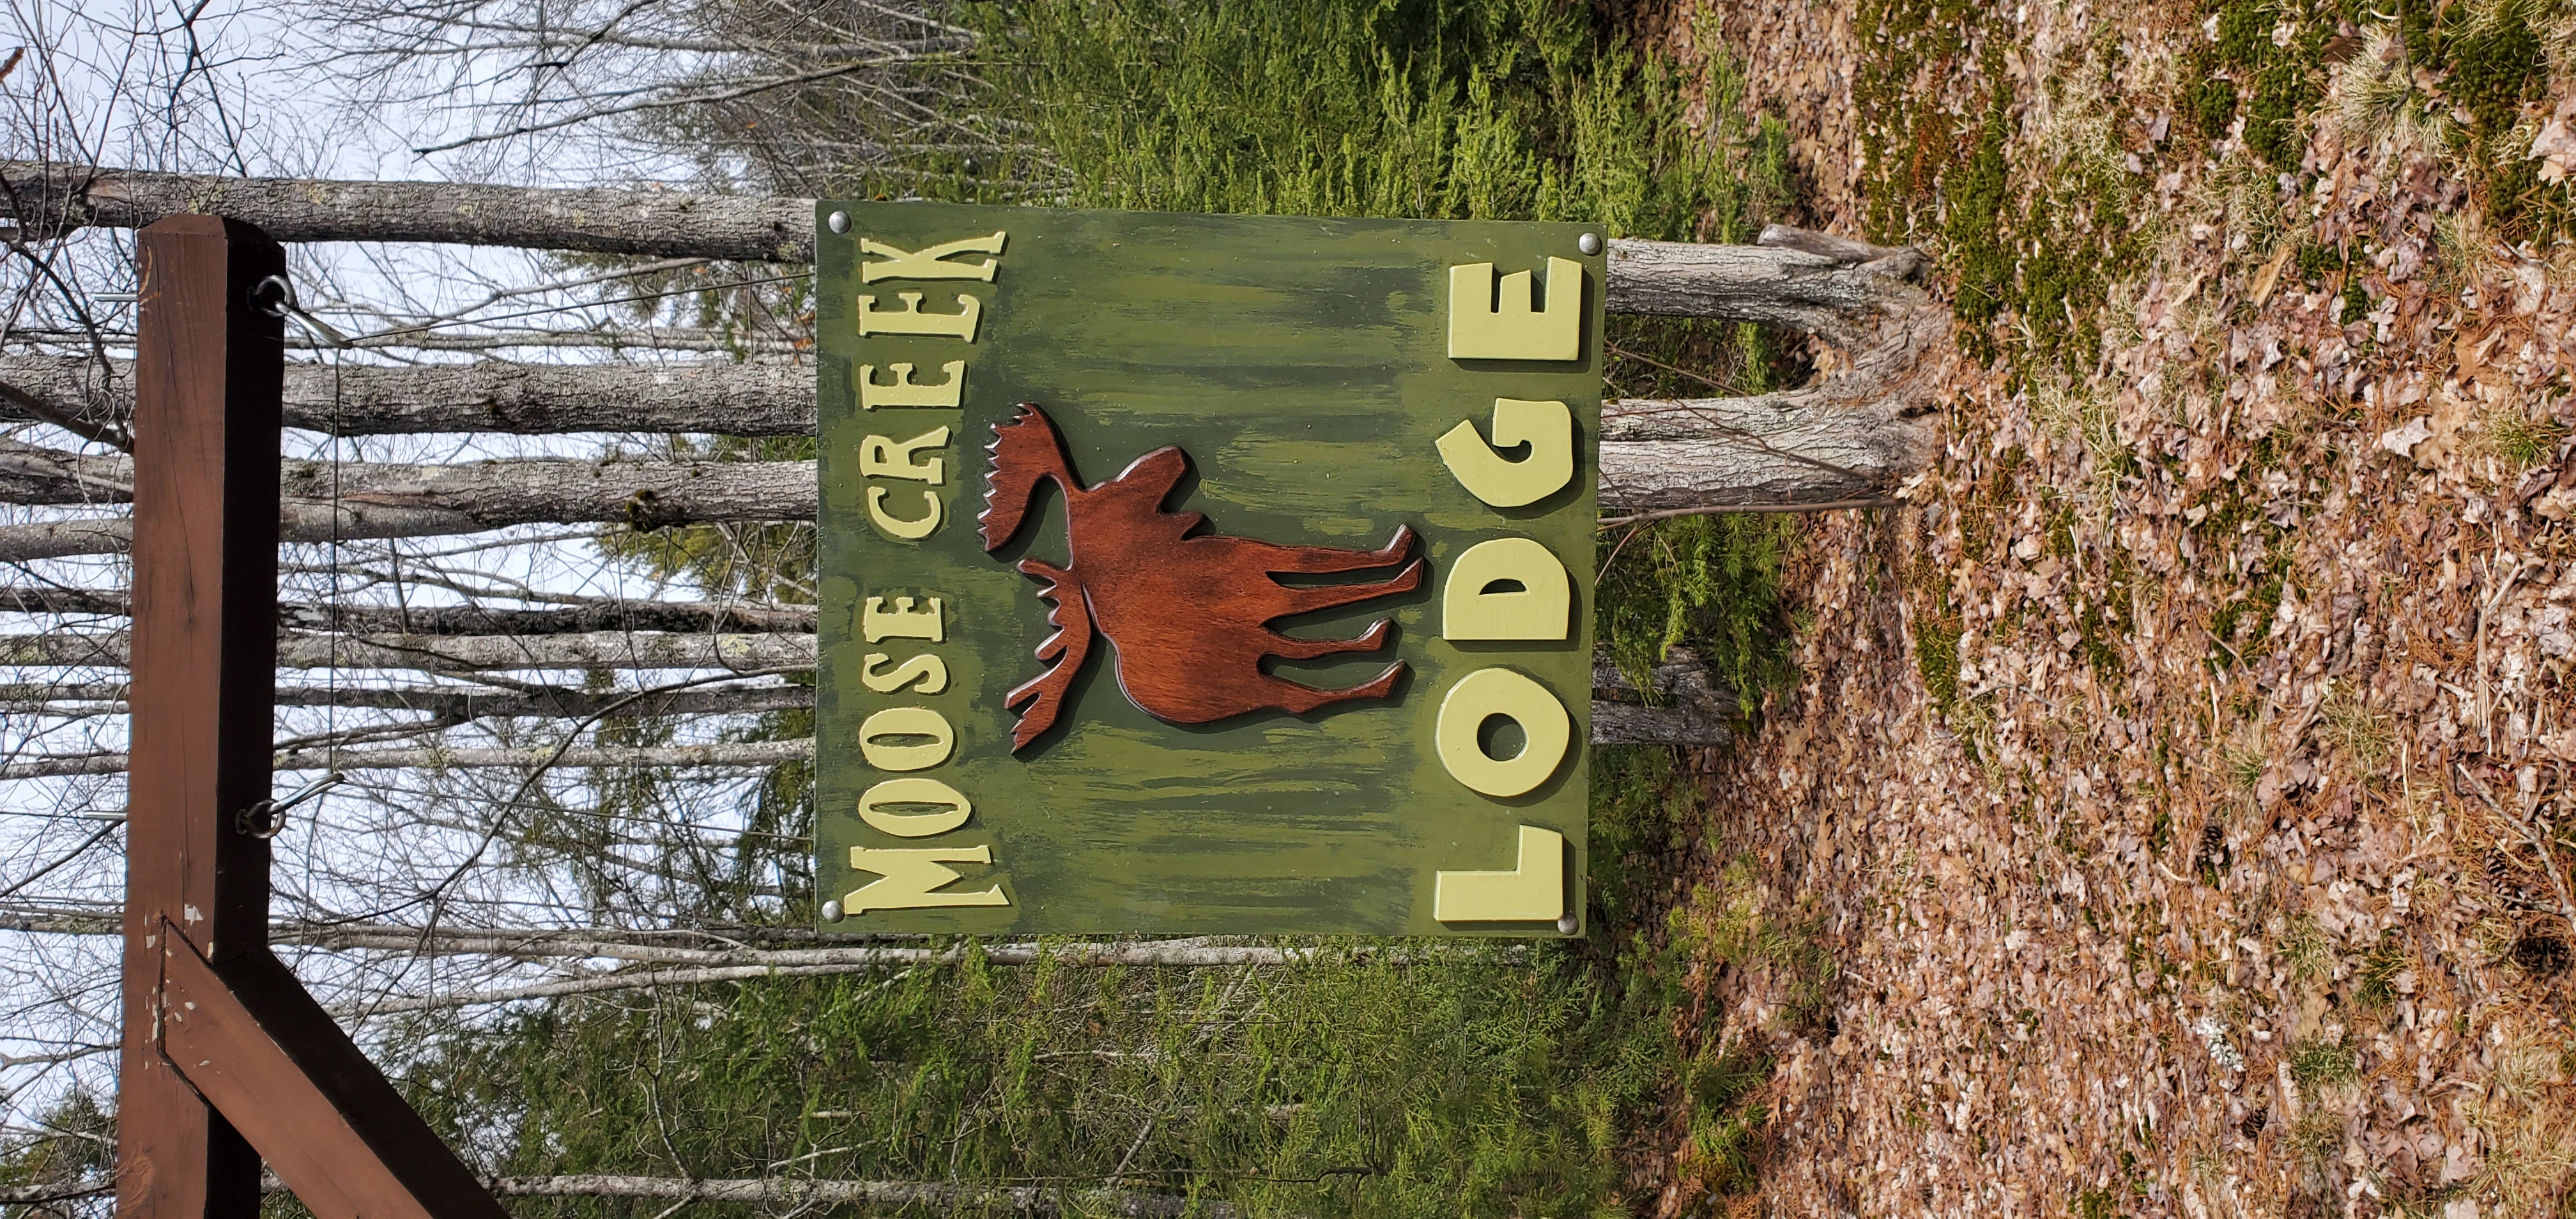 Moose Creek Lodge & Cabin - Guest suites for Rent in Scarborough, Maine,  United States - Airbnb